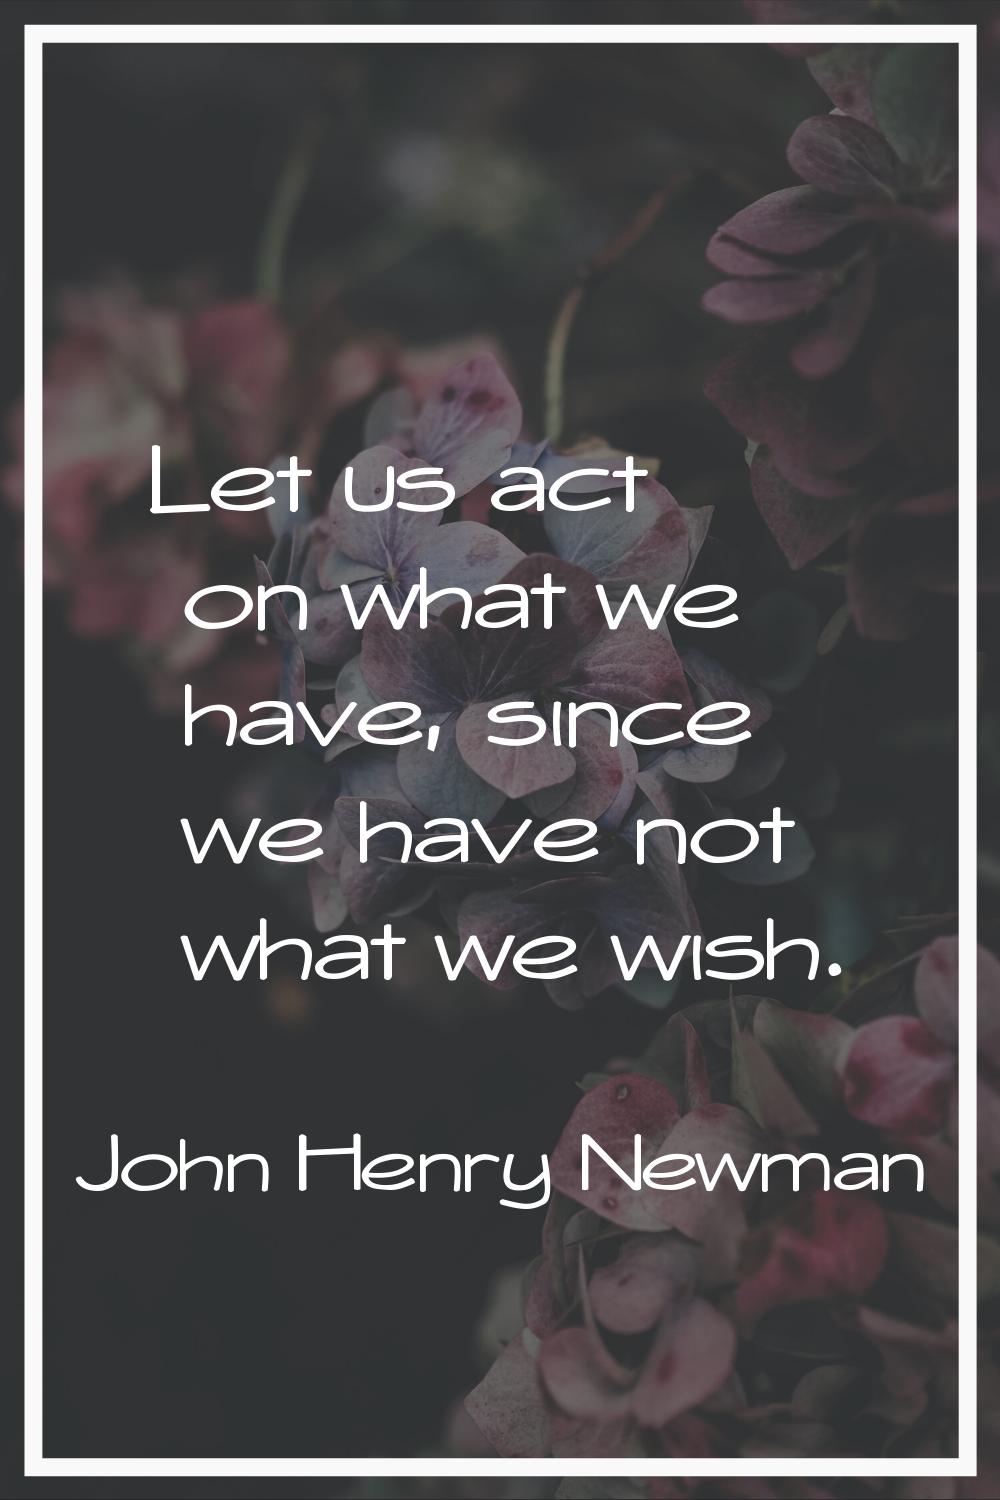 Let us act on what we have, since we have not what we wish.